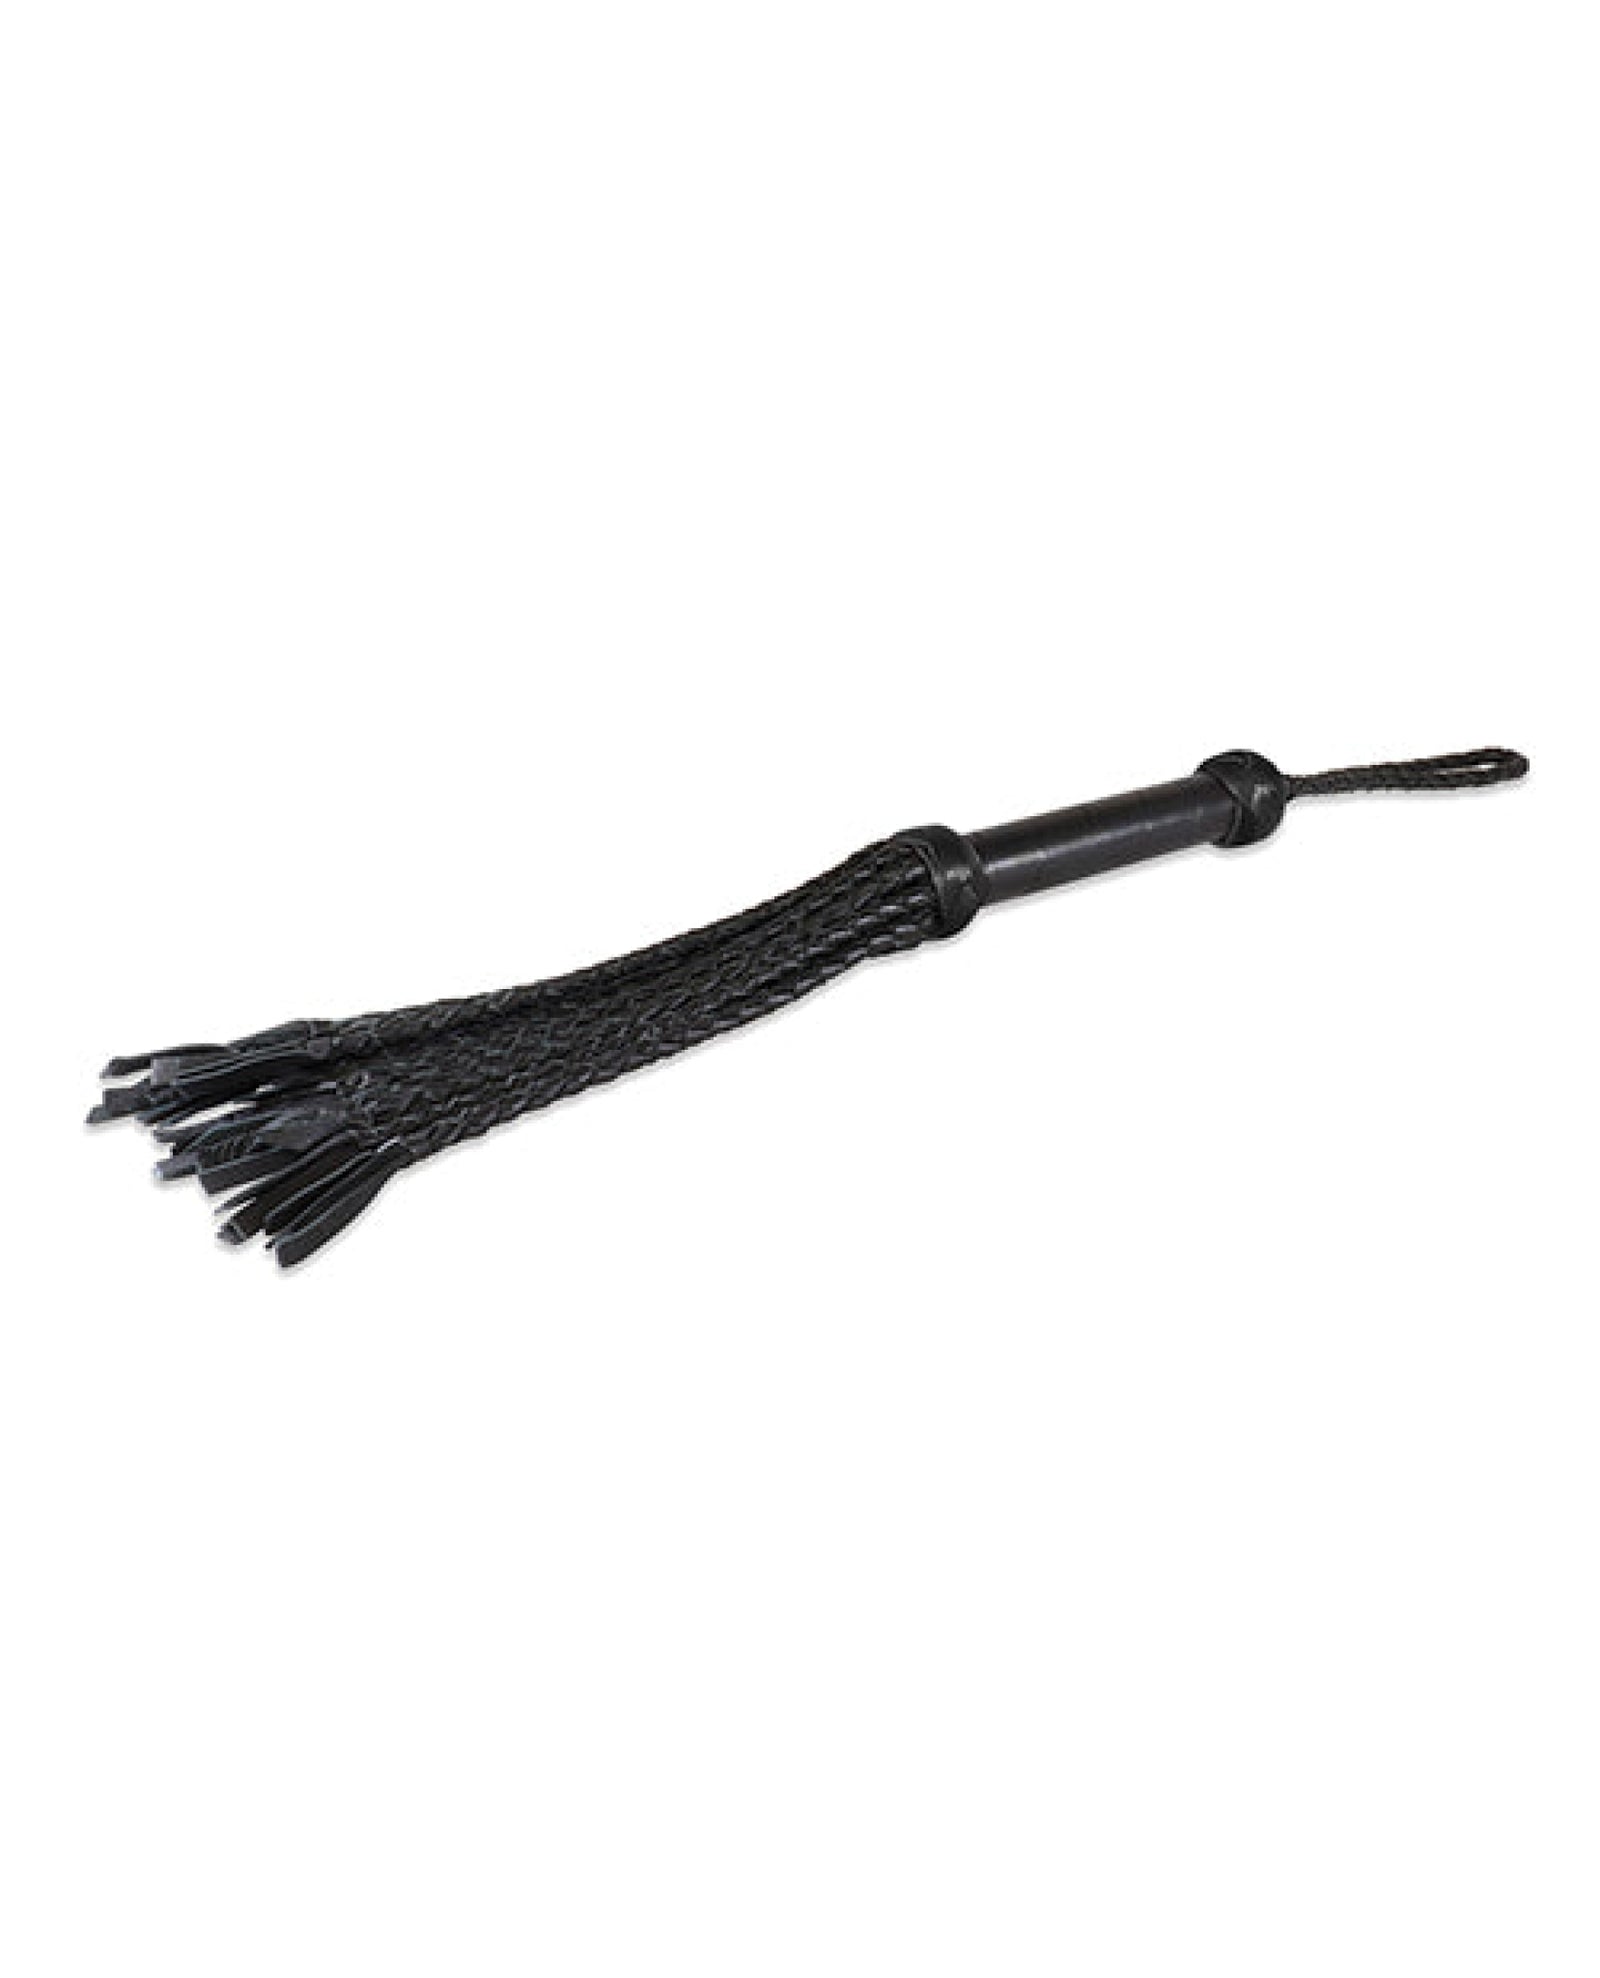 Sultra 16" Lambskin Wrapped Grip Flogger Sultra